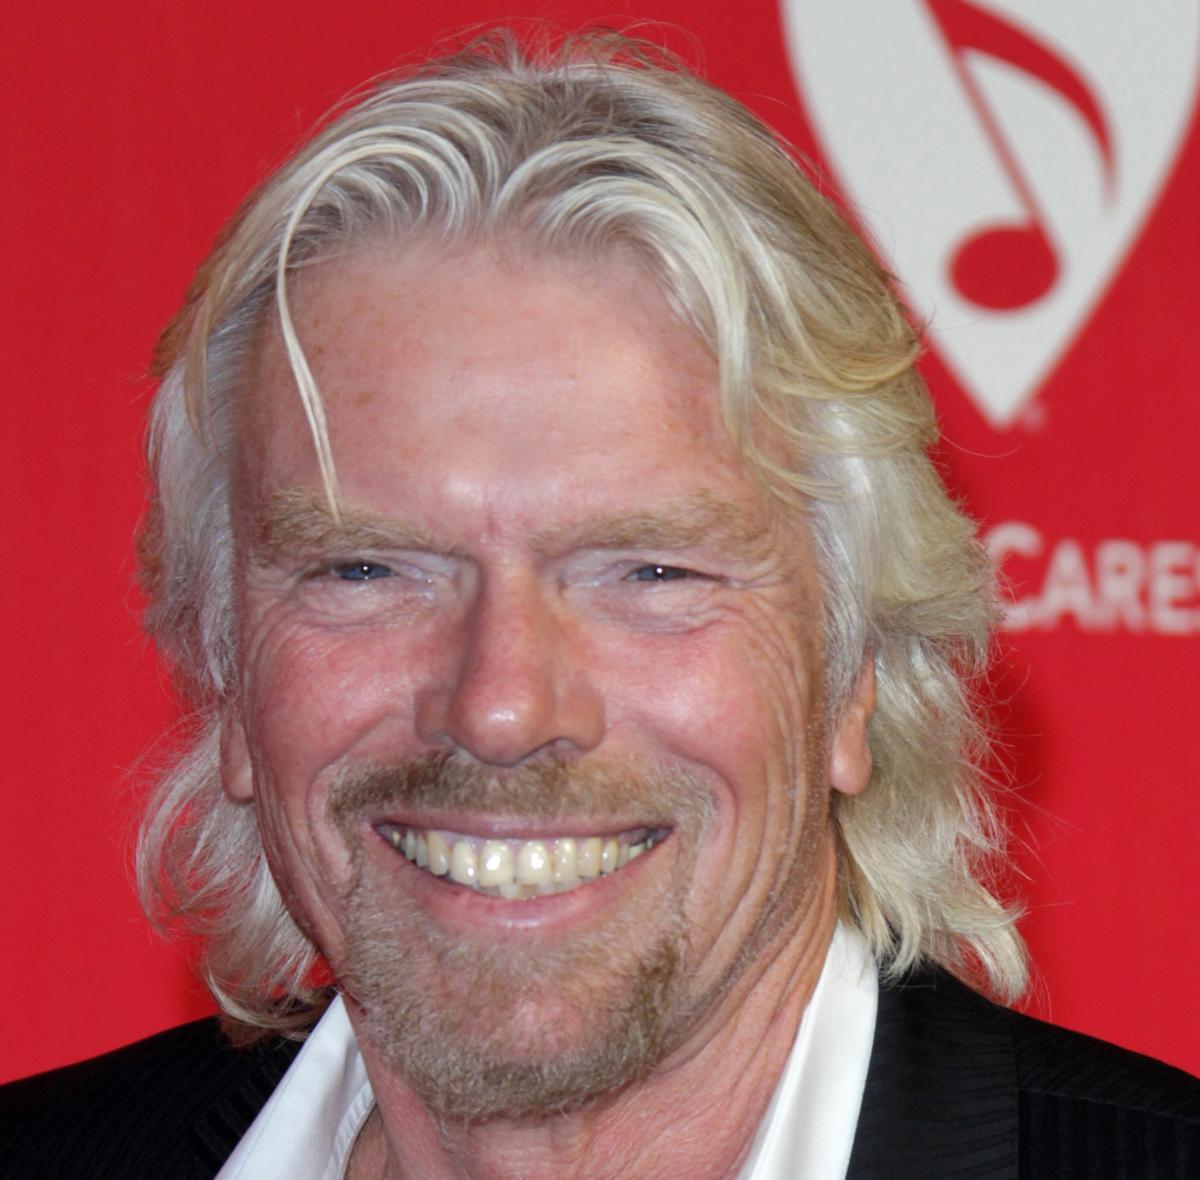 The Virgin brand’s concept, founded by Richard Branson, revolves around eliminating fees and surcharges / 